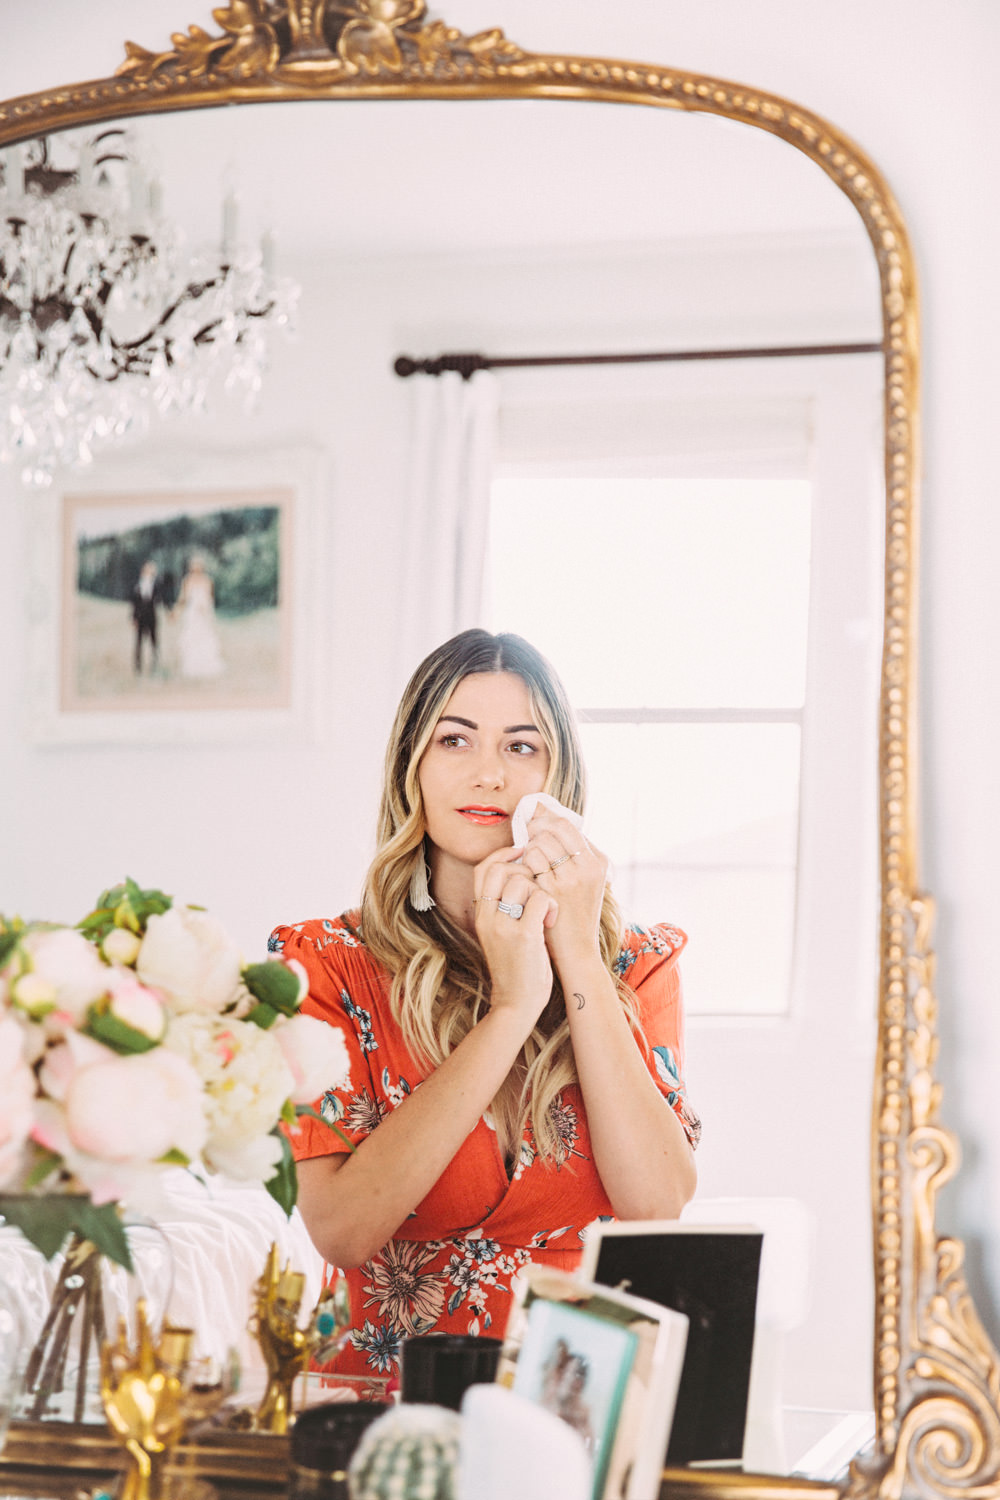 Dash of Darling shares four nighttime essentials that she keeps by her bedside on her nightstand, including Olay Daily Facials cleansing cloths.